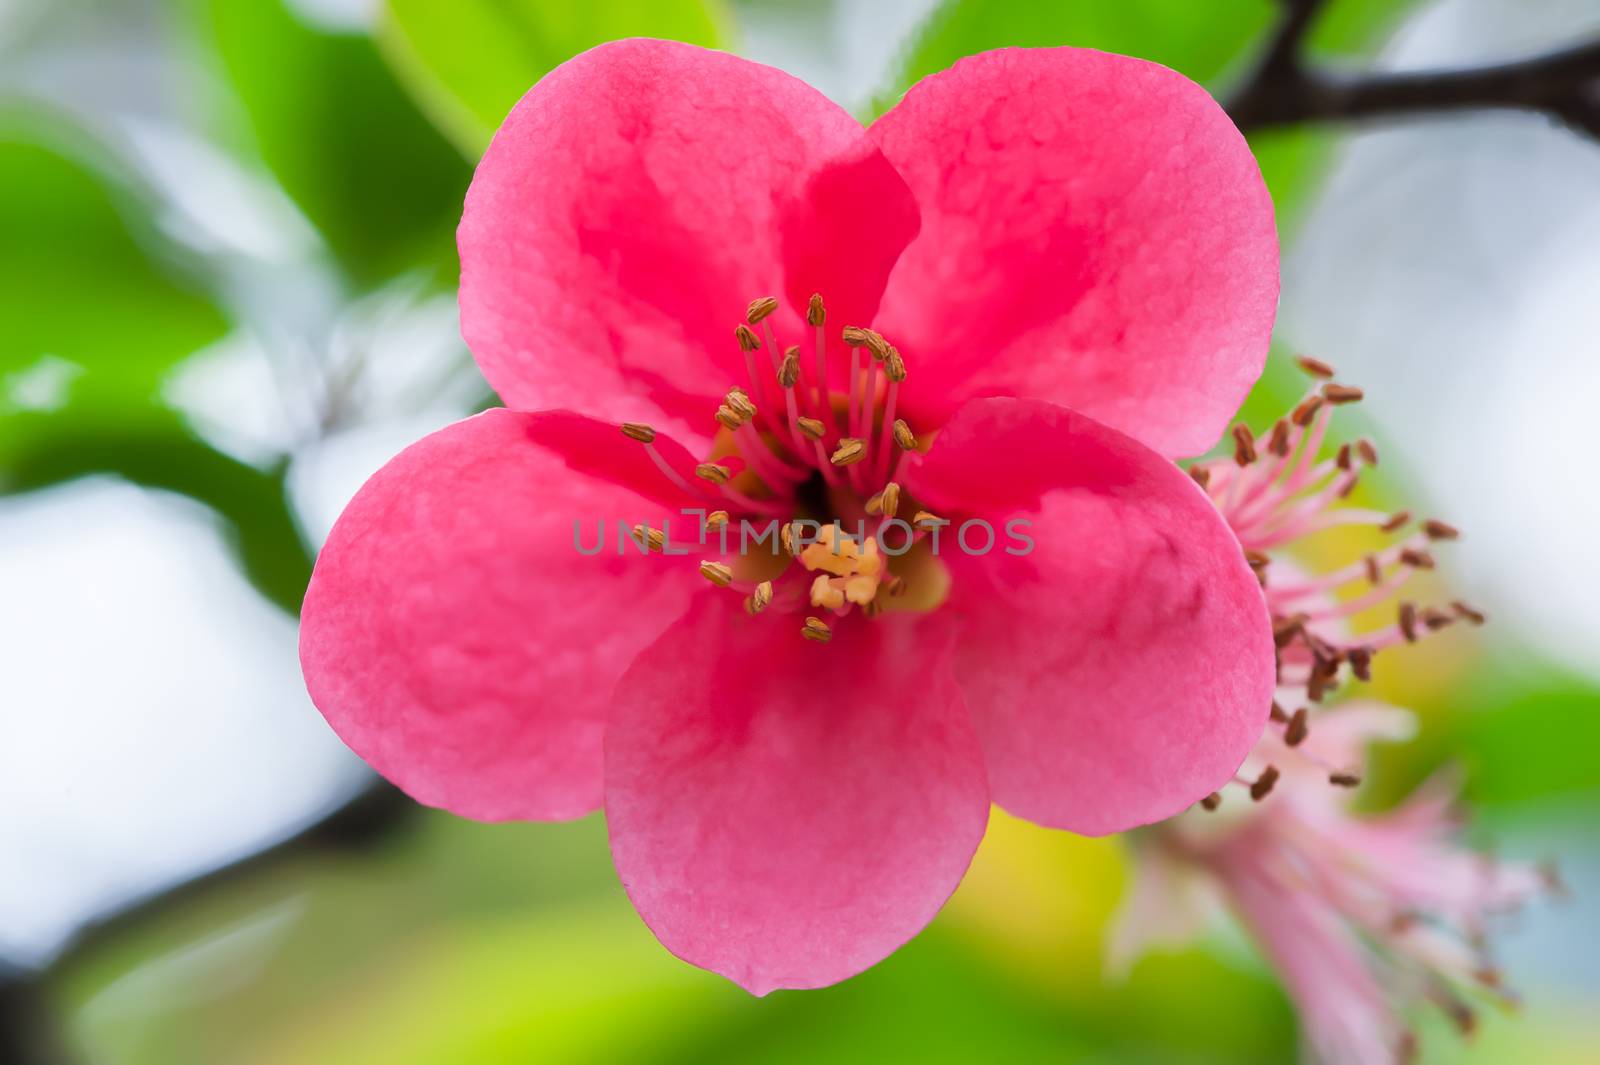 Red malus spectabilis flower also know as chinese crabapple in springtime, Chengdu, China